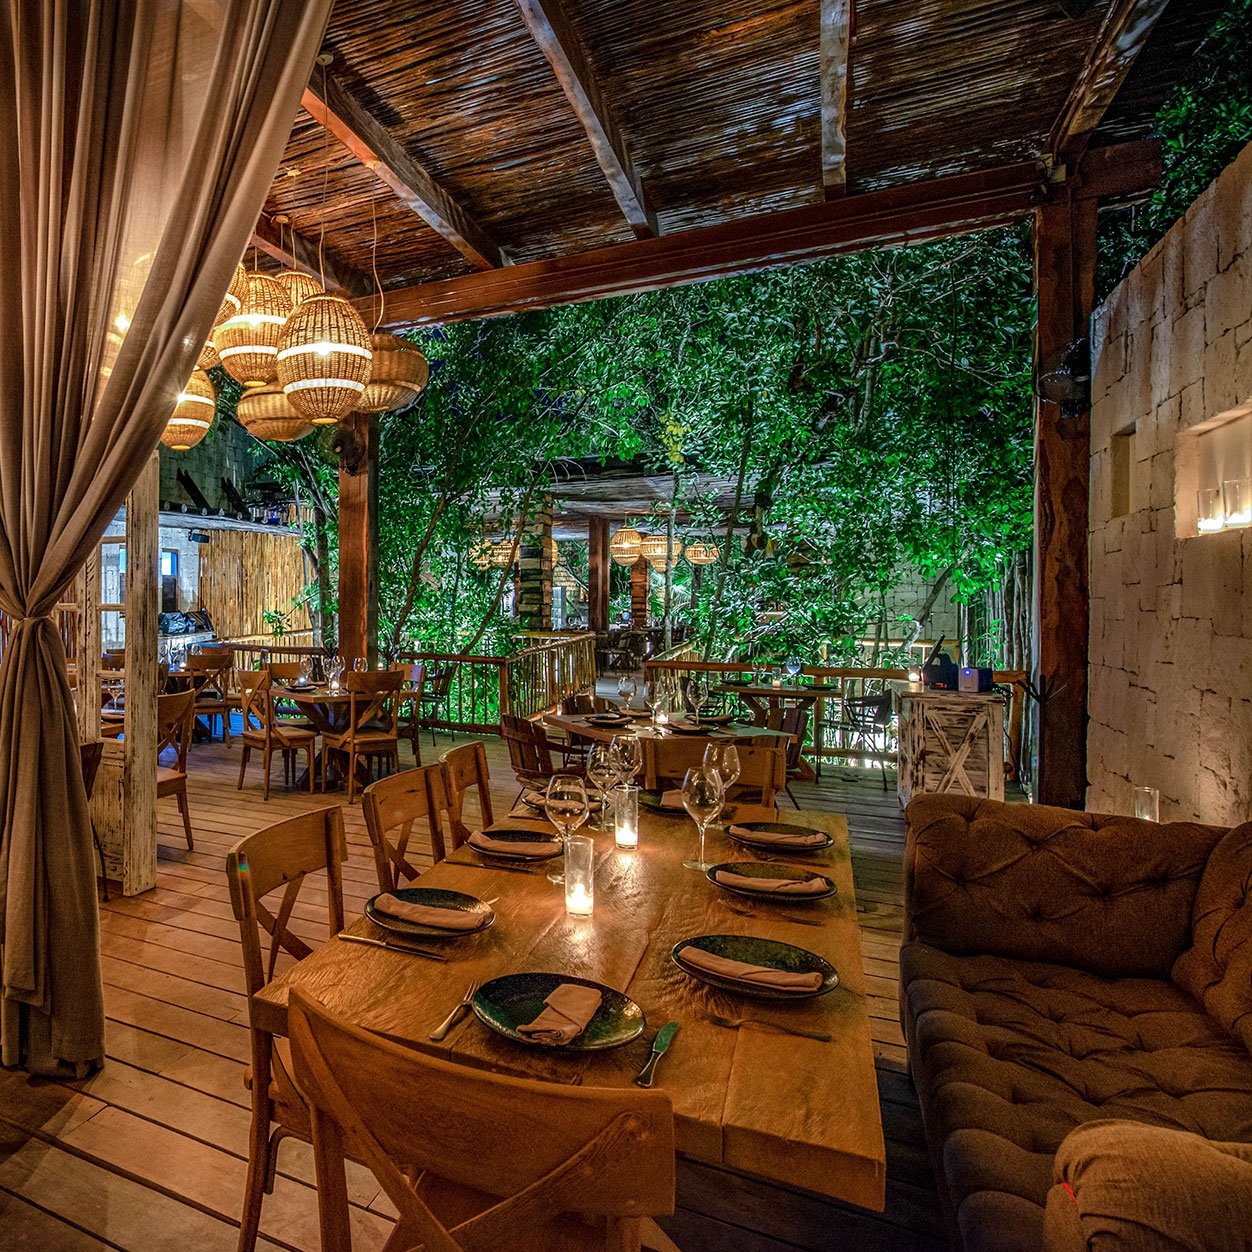 Selected restaurants to celebrate Mexico Mothers Day in Tulum